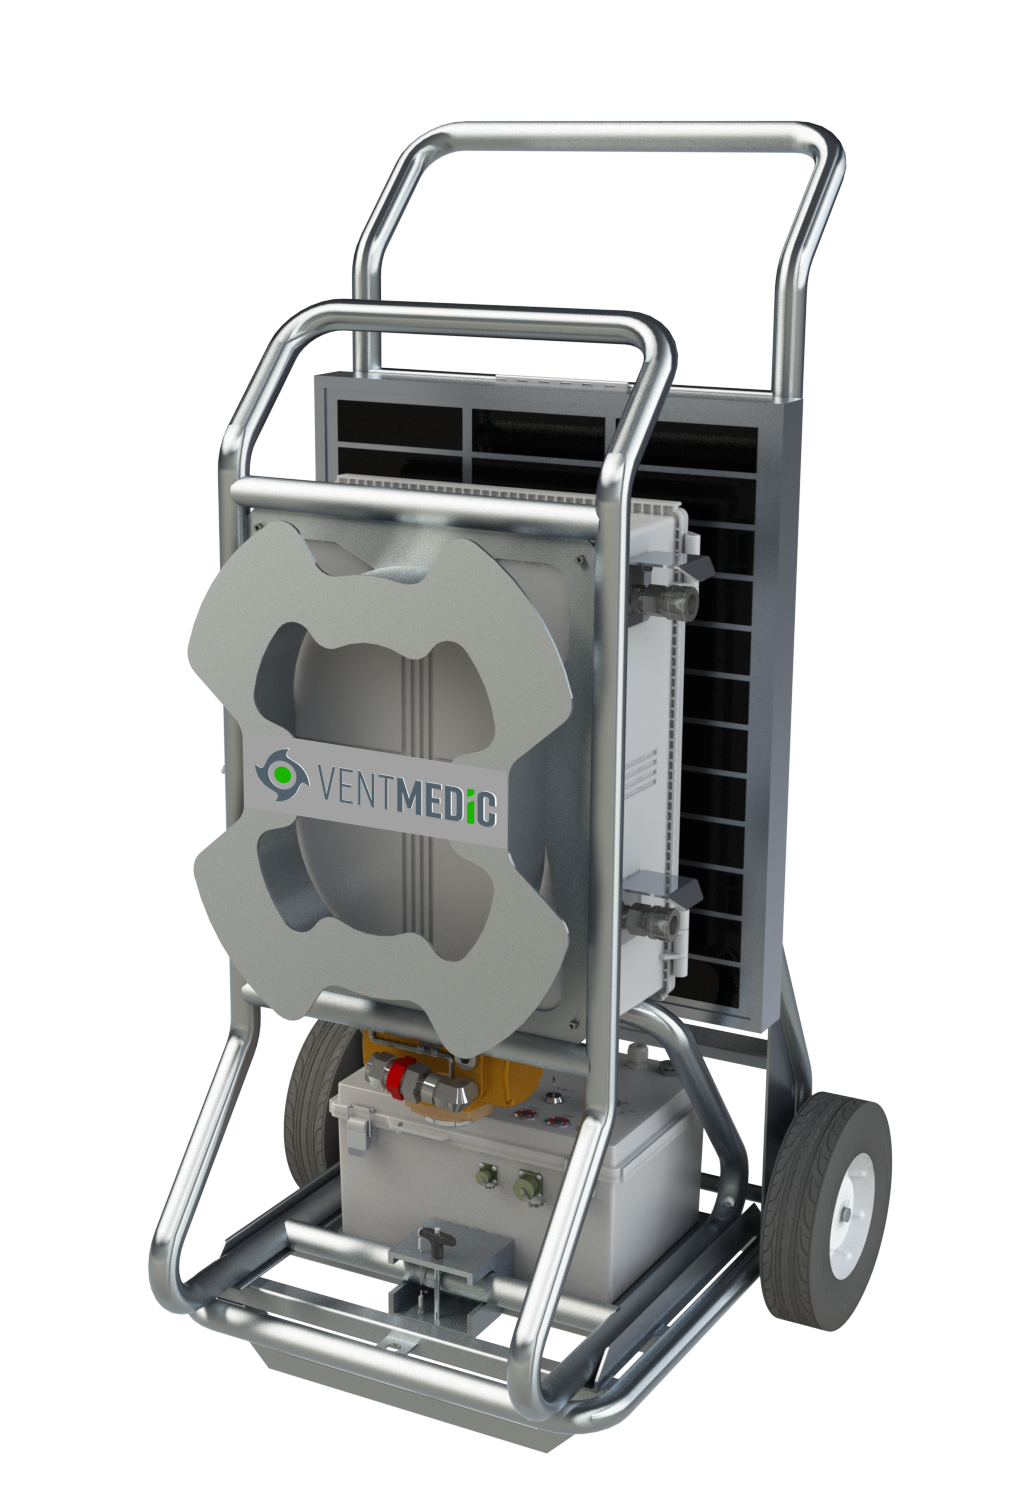 VentMEDIC is a cutting-edge digital Measurement, Reporting, and Verification (dMRV) technology. It goes beyond traditional methods, ensuring unparallel accuracy and transparency in methane emissions quantification.